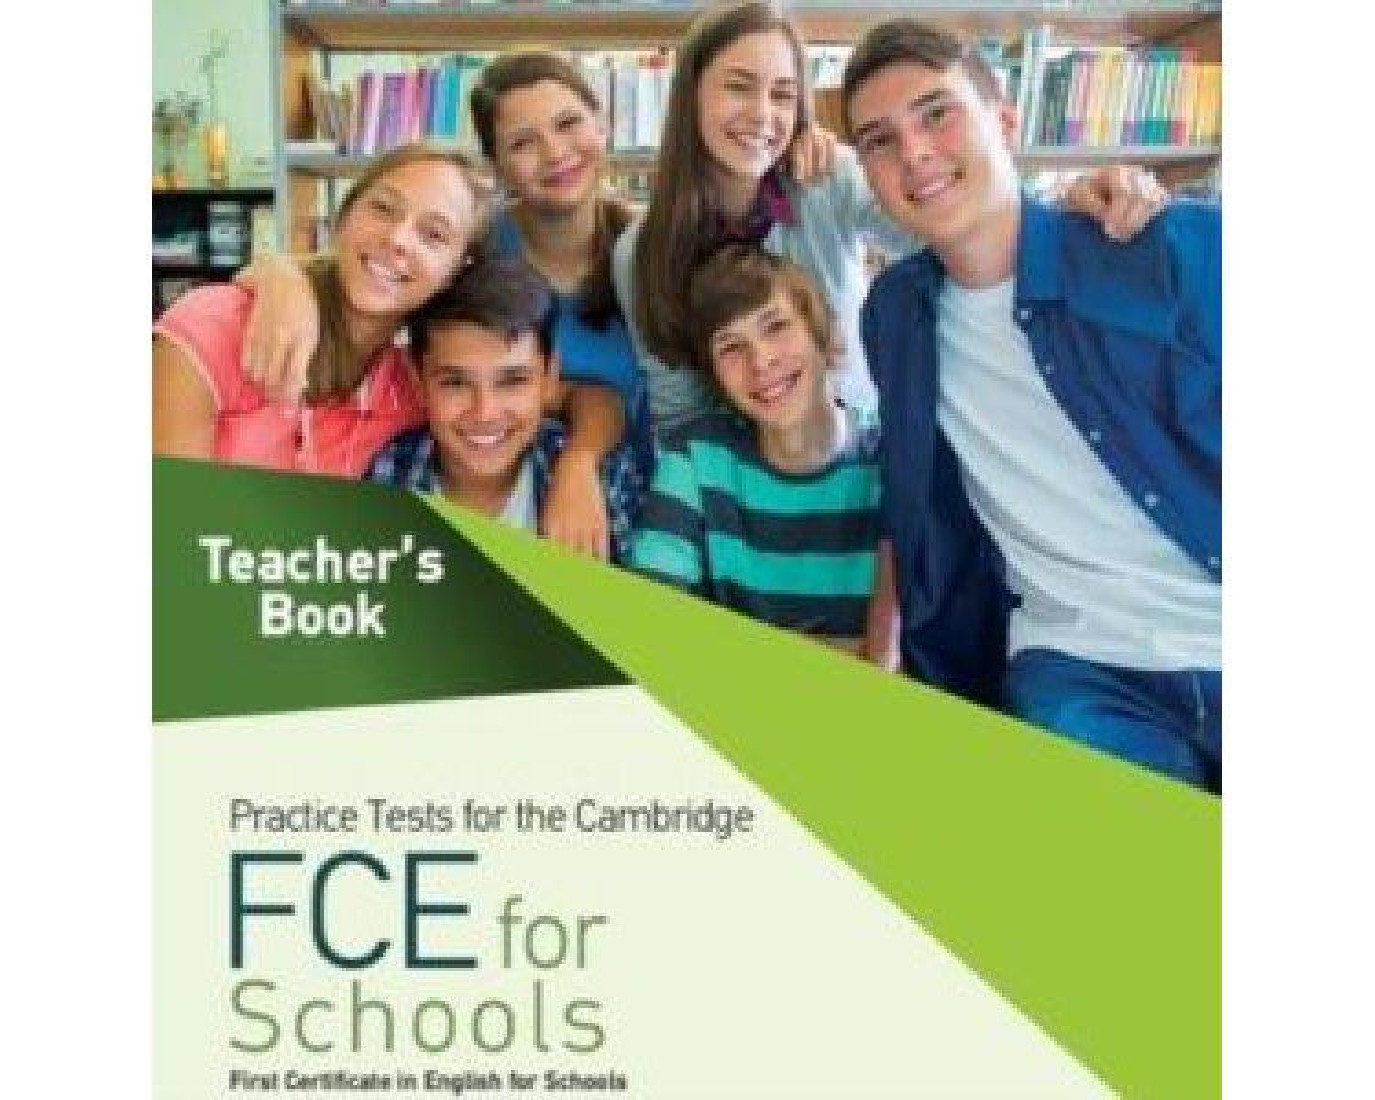 PRACTICE TESTS FOR THE CAMBRIDGE FCE FOR SCHOOLS TCHRS